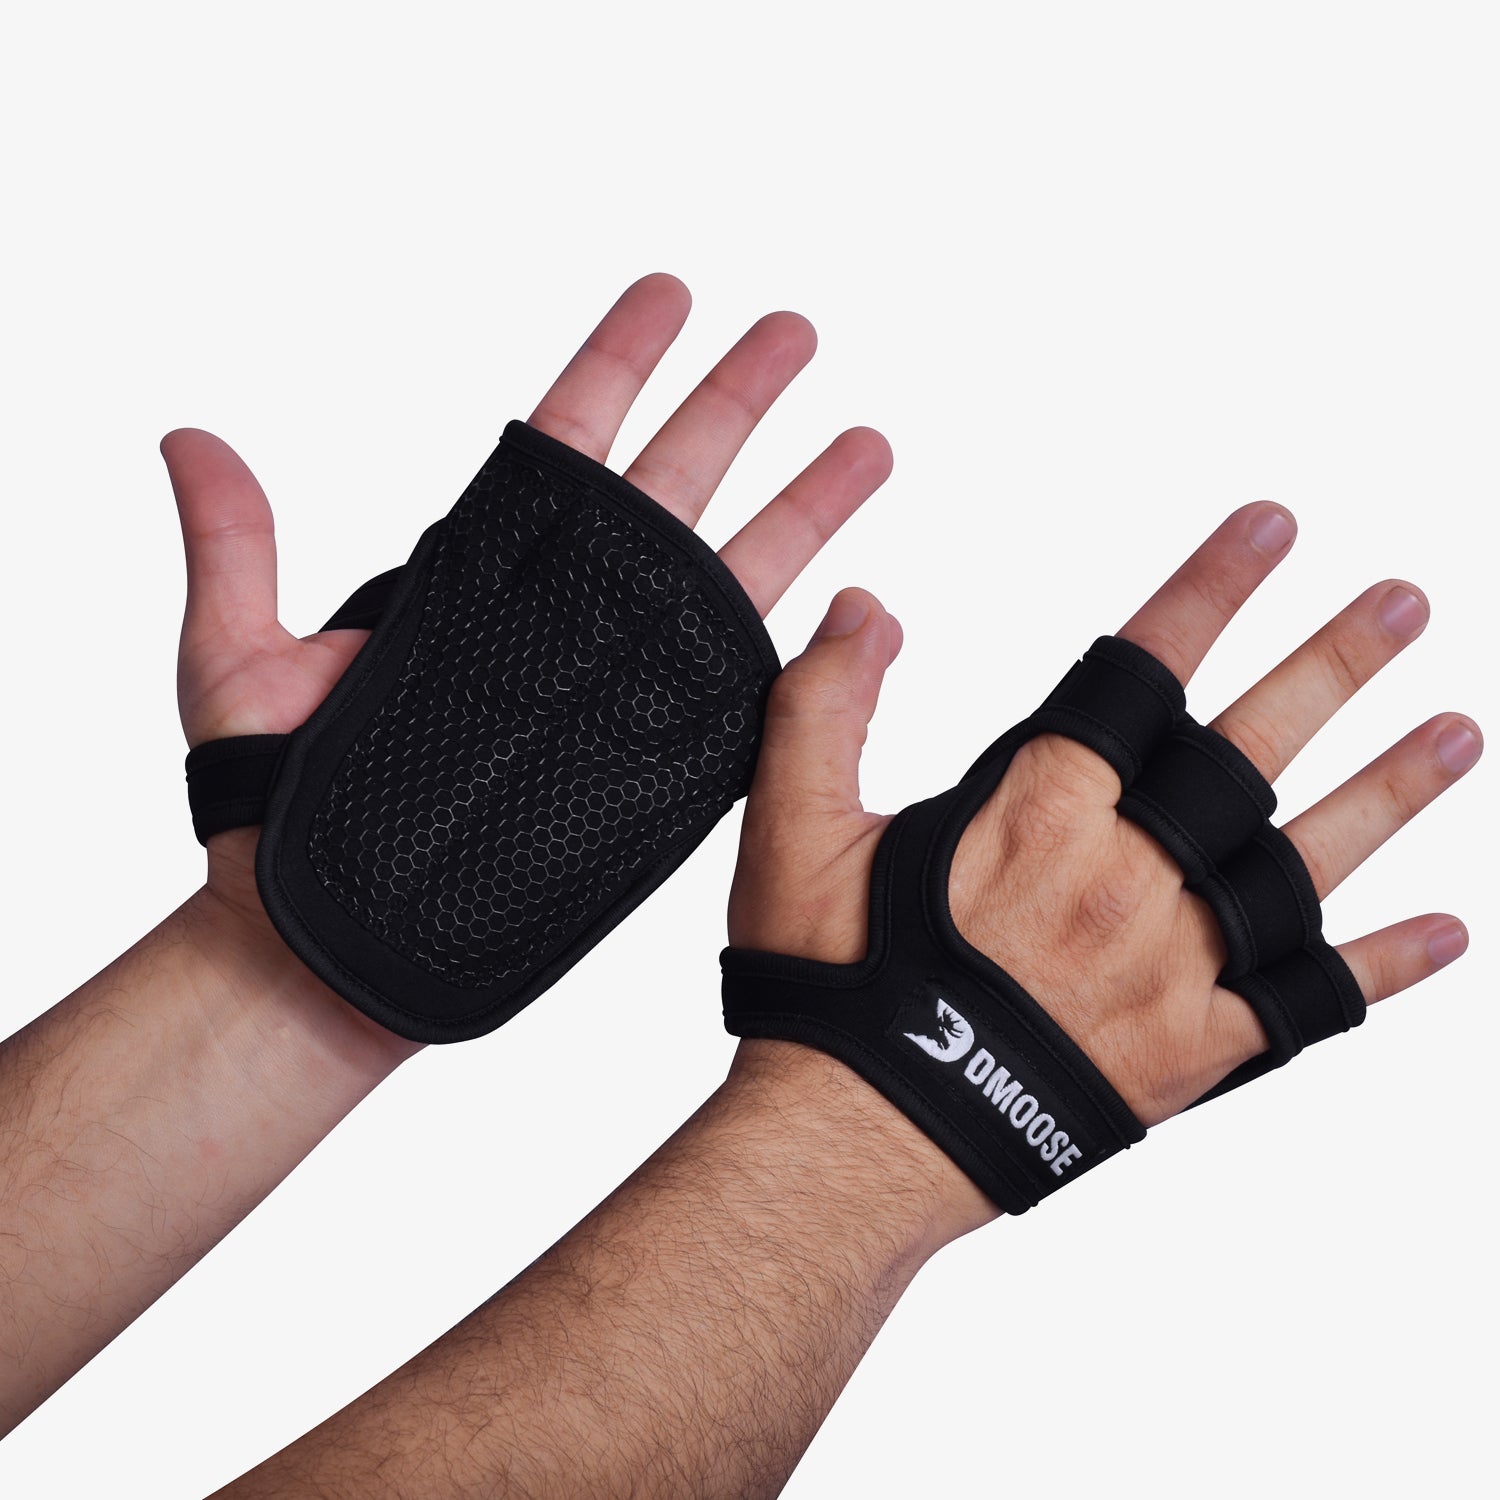 Palm Grips, Workout Gloves for Lifting Weight